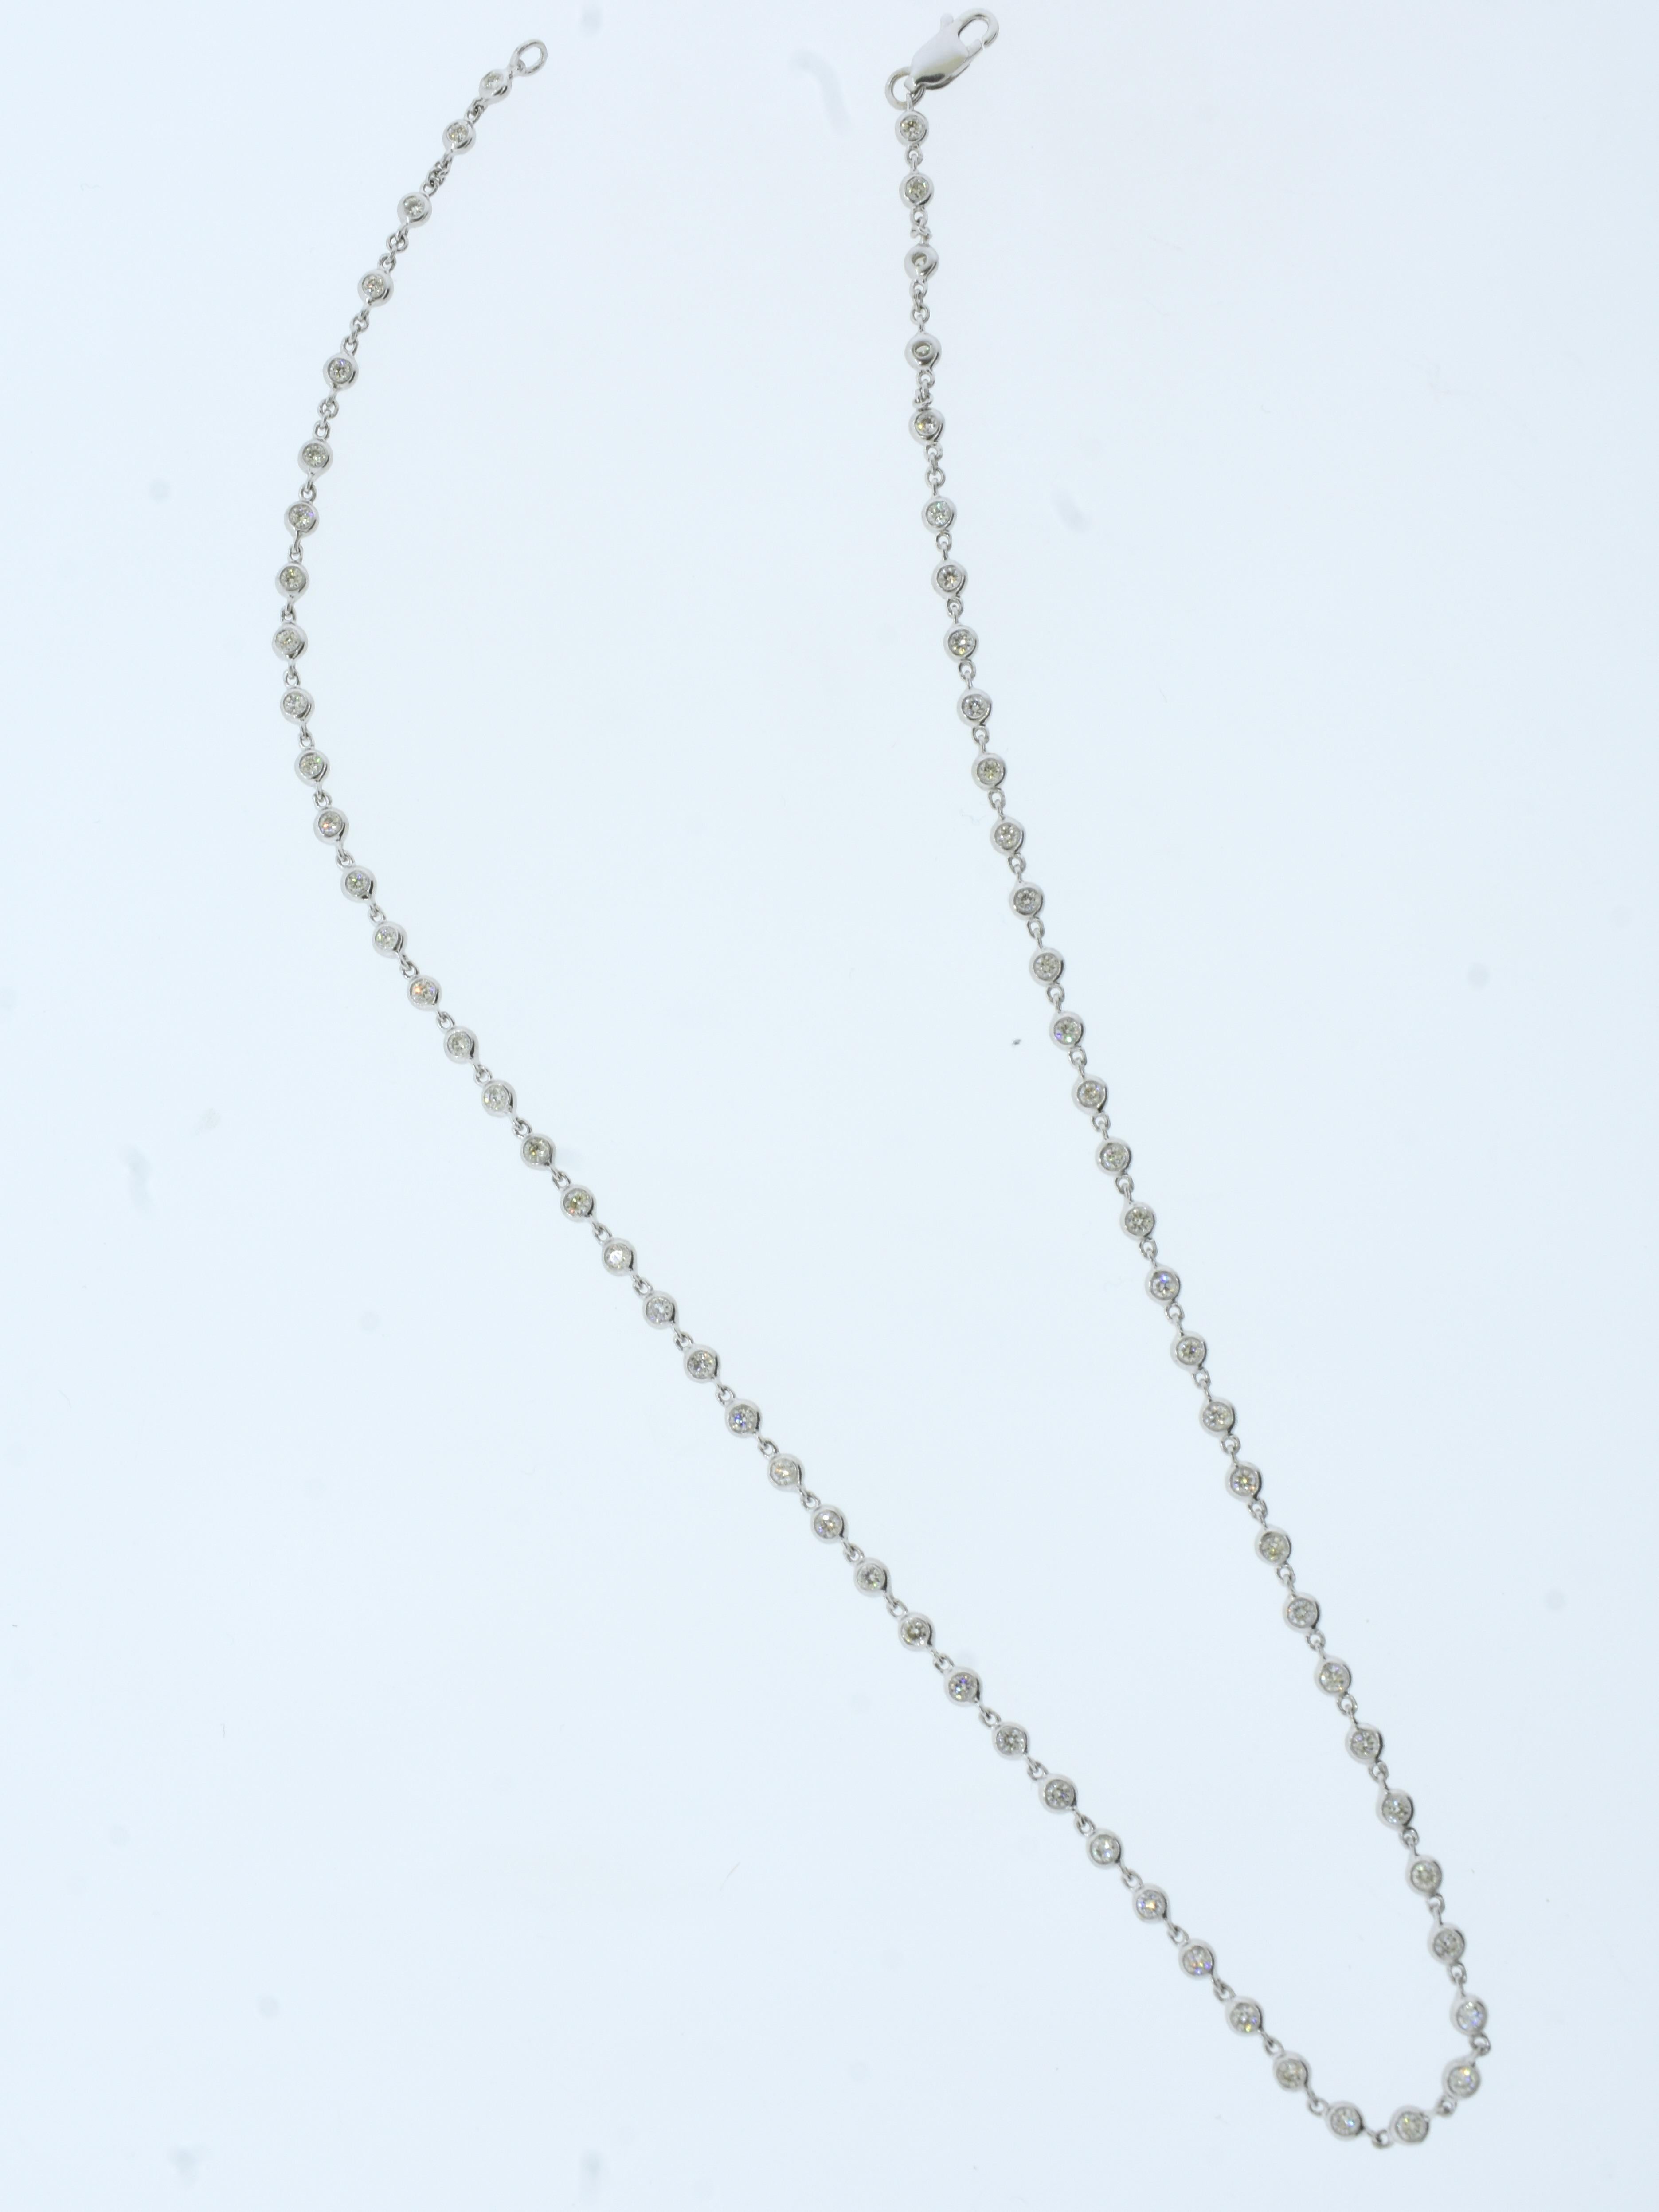 18K White Gold Diamond Necklace Chain with 2.02 cts. of Fine Diamonds In Excellent Condition For Sale In Aspen, CO